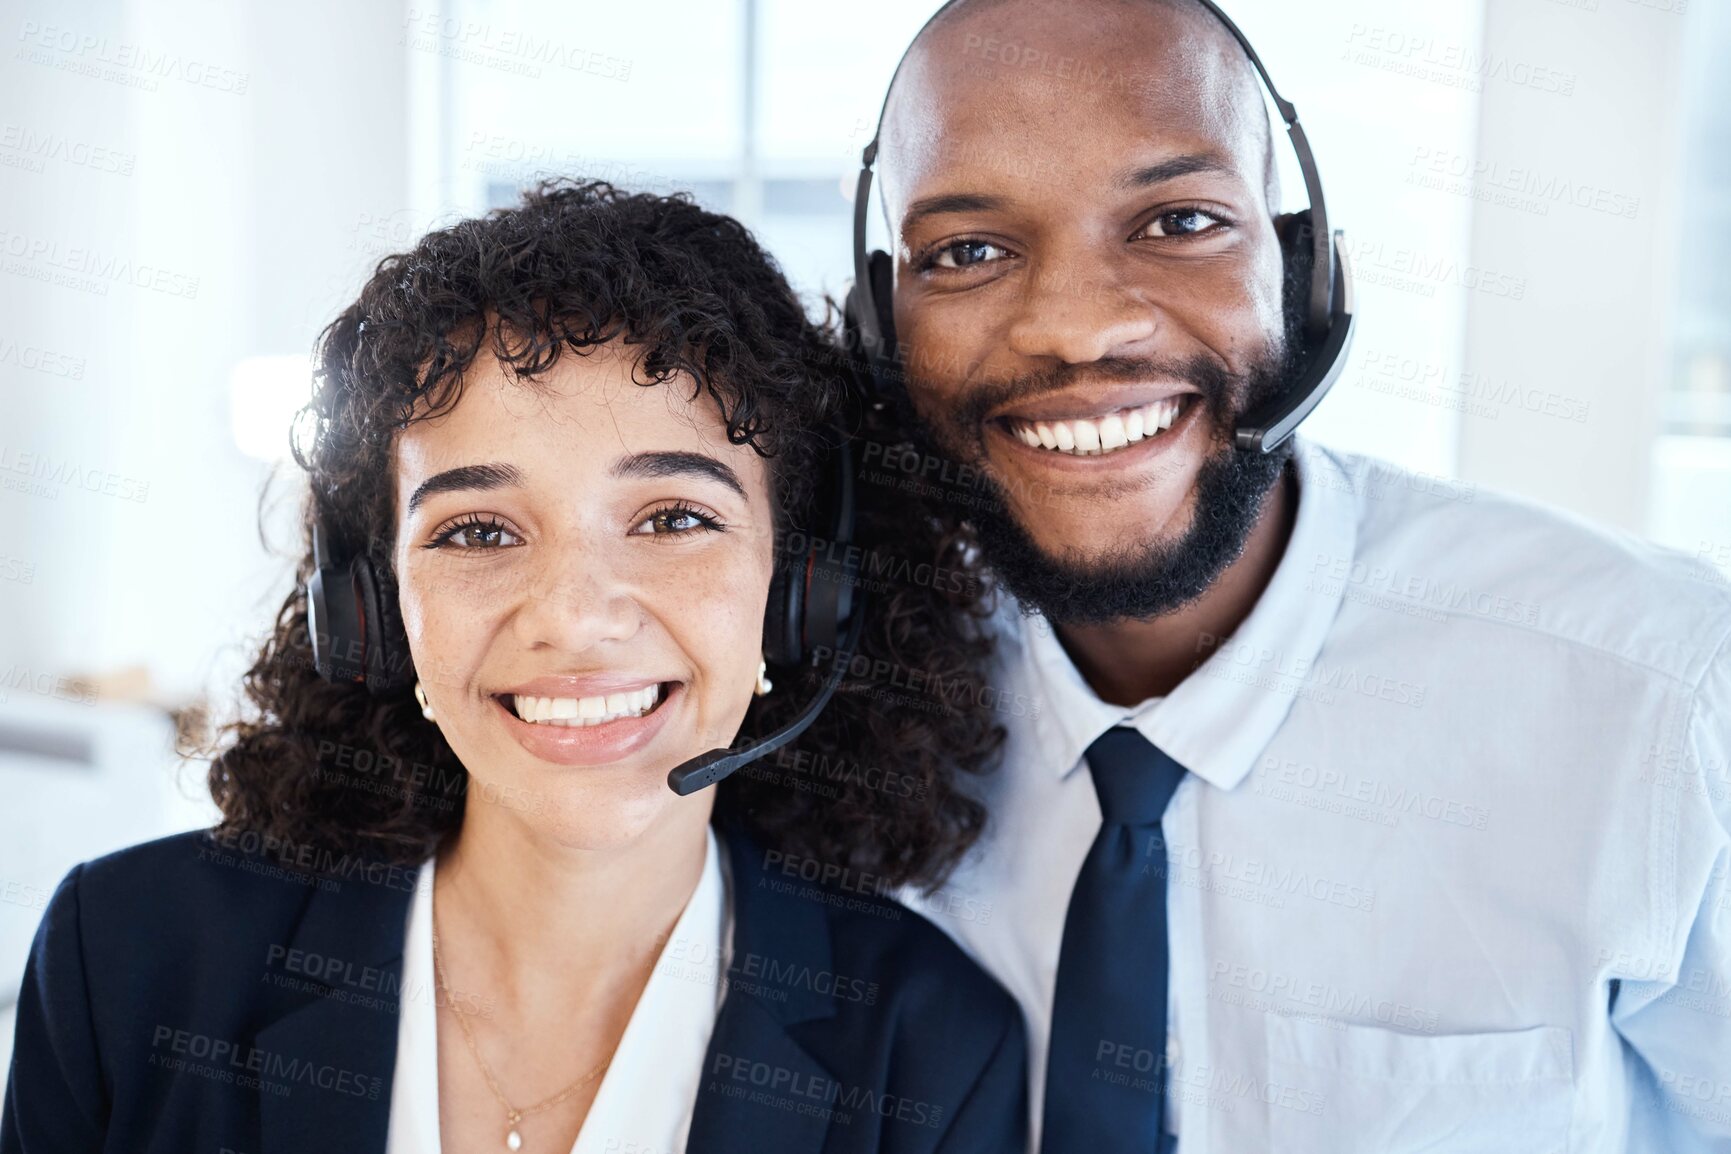 Buy stock photo Happy, portrait and customer service consultants in the office  working on a crm consultation online. Happiness, smile and interracial telemarketing colleagues taking a picture together in workplace.